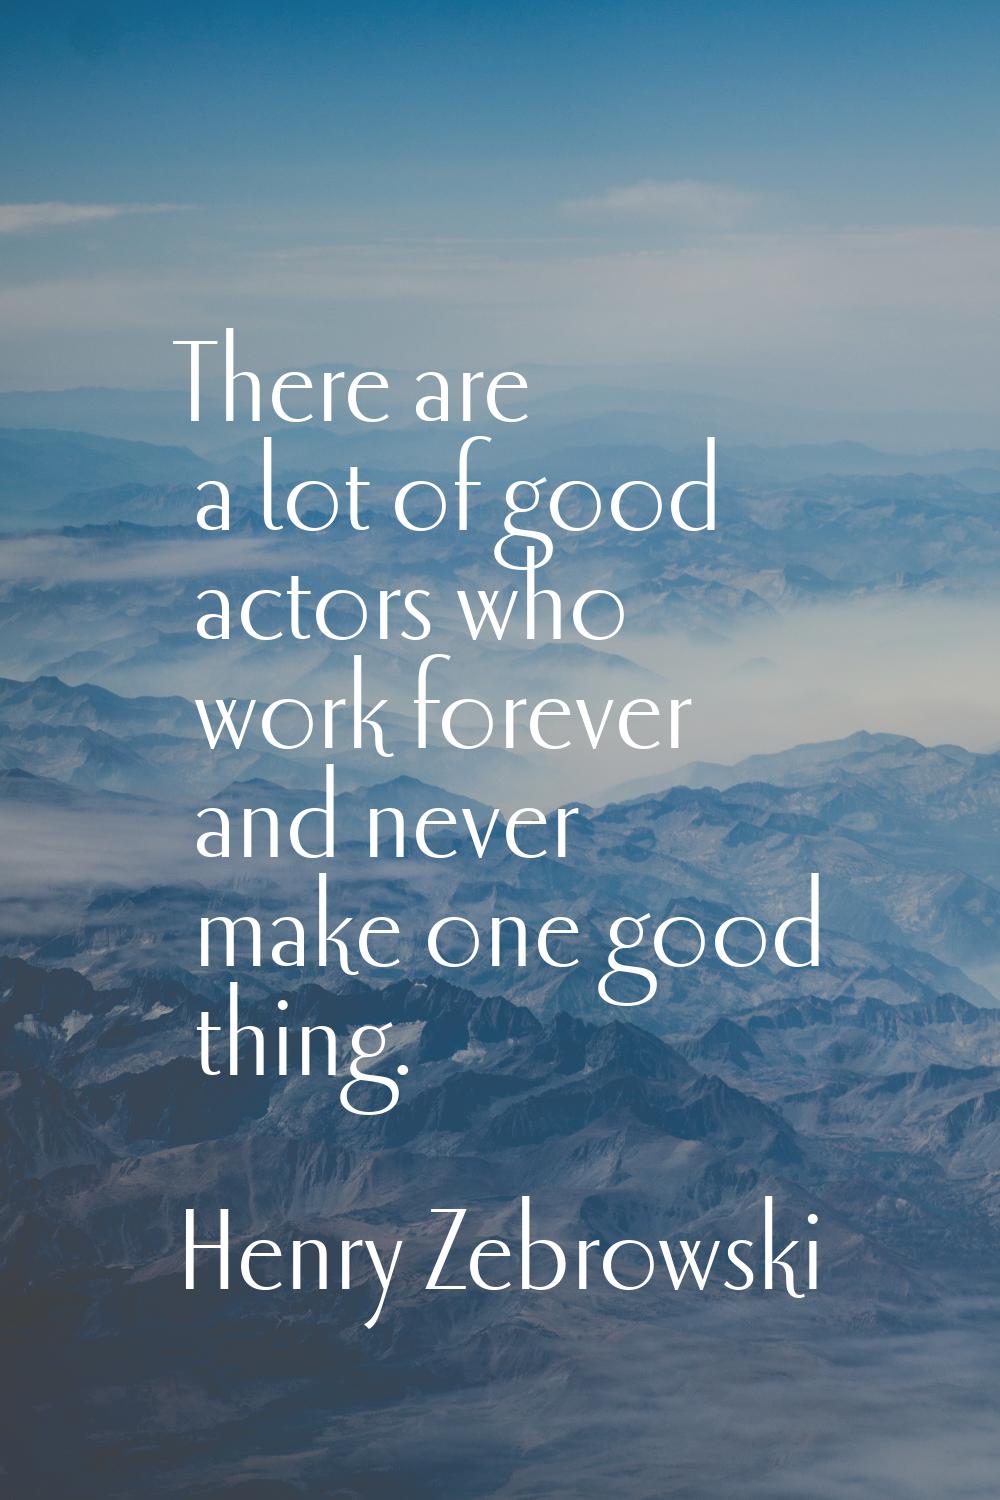 There are a lot of good actors who work forever and never make one good thing.